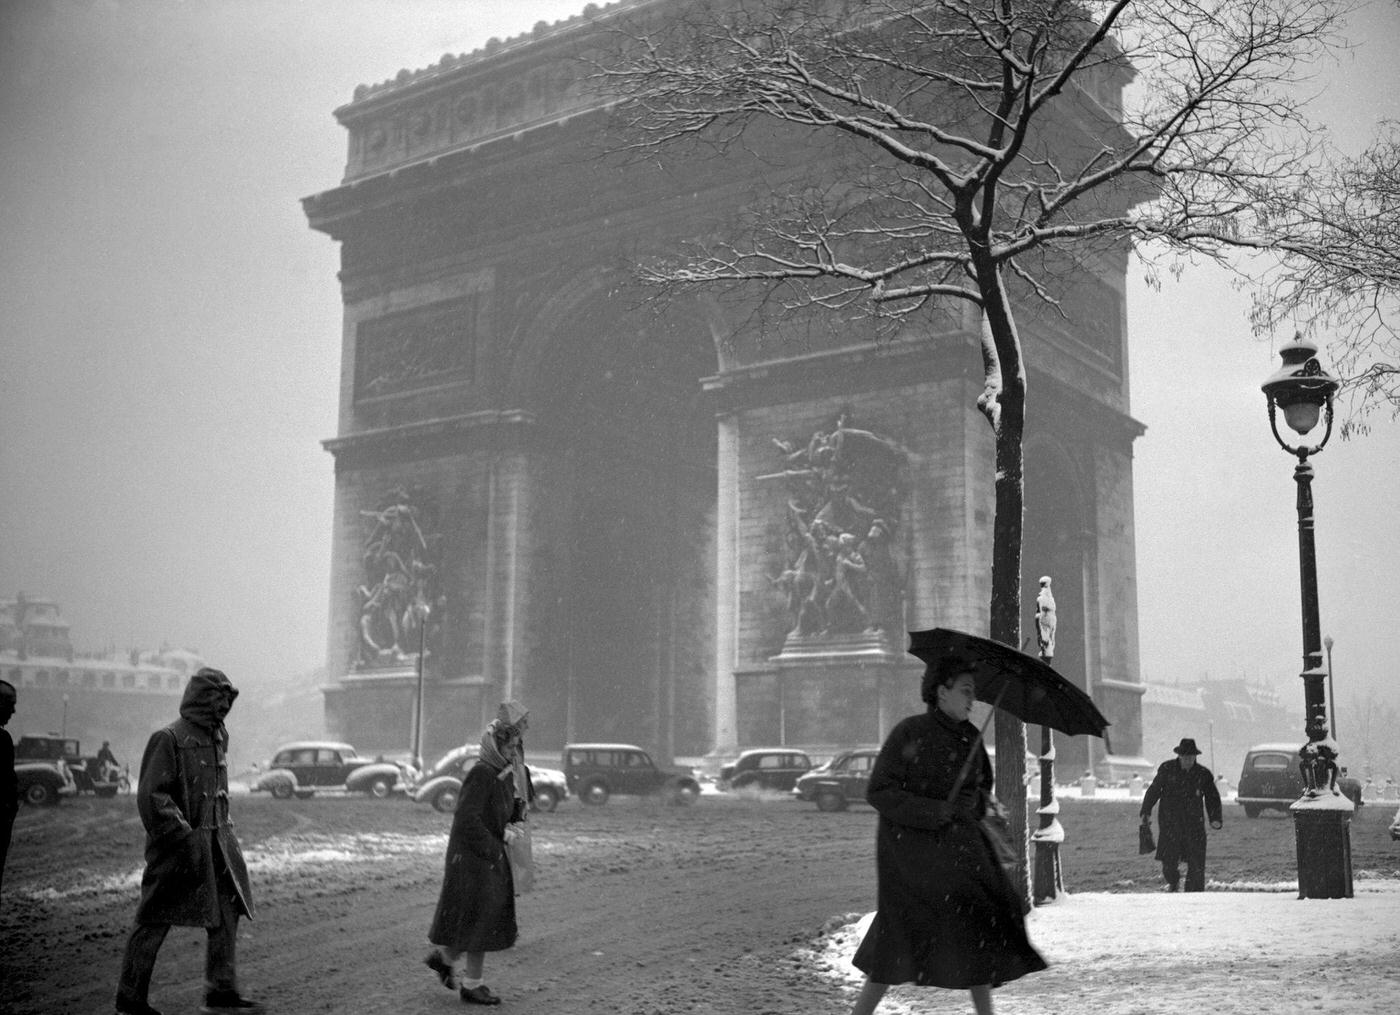 People Walking In The Muddy Snow Near The Arc de Triomphe, Paris, During The 1952 Winter.